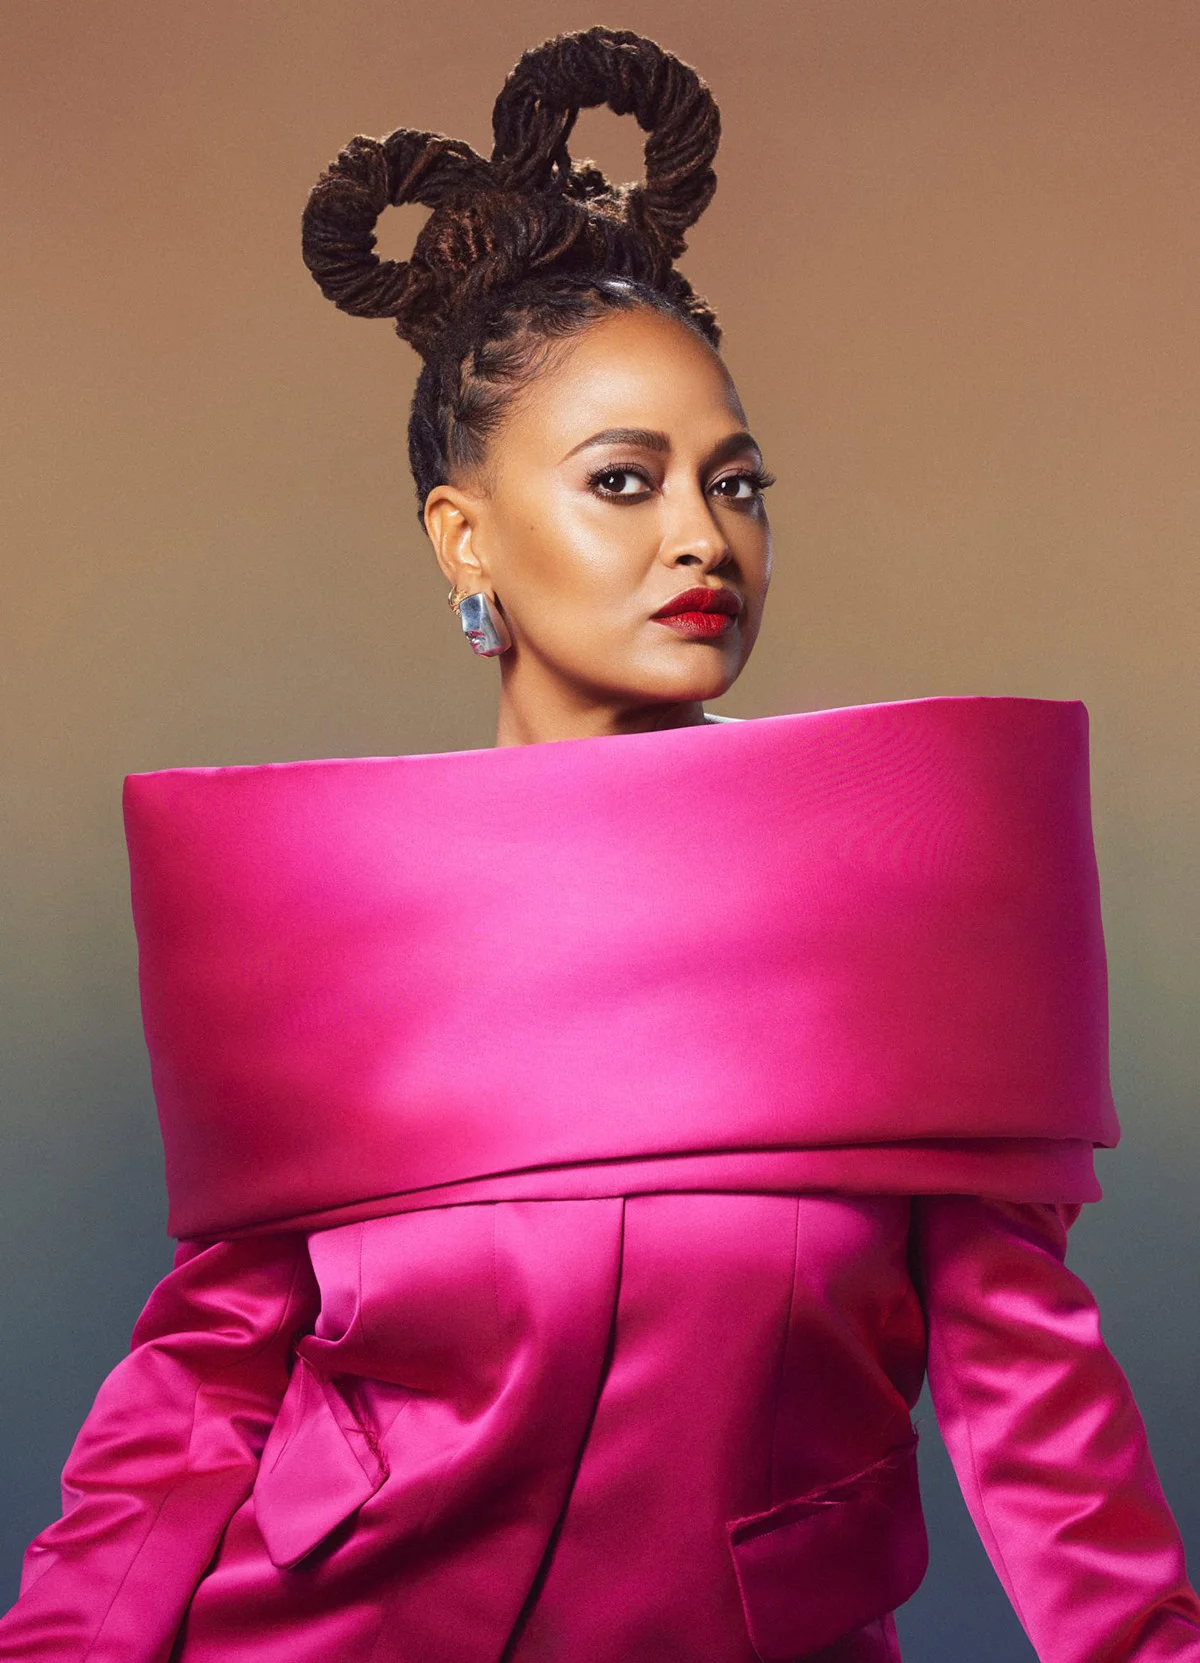 Ava DuVernay covers InStyle US March 2022 Digital Edition by Chrisean Rose